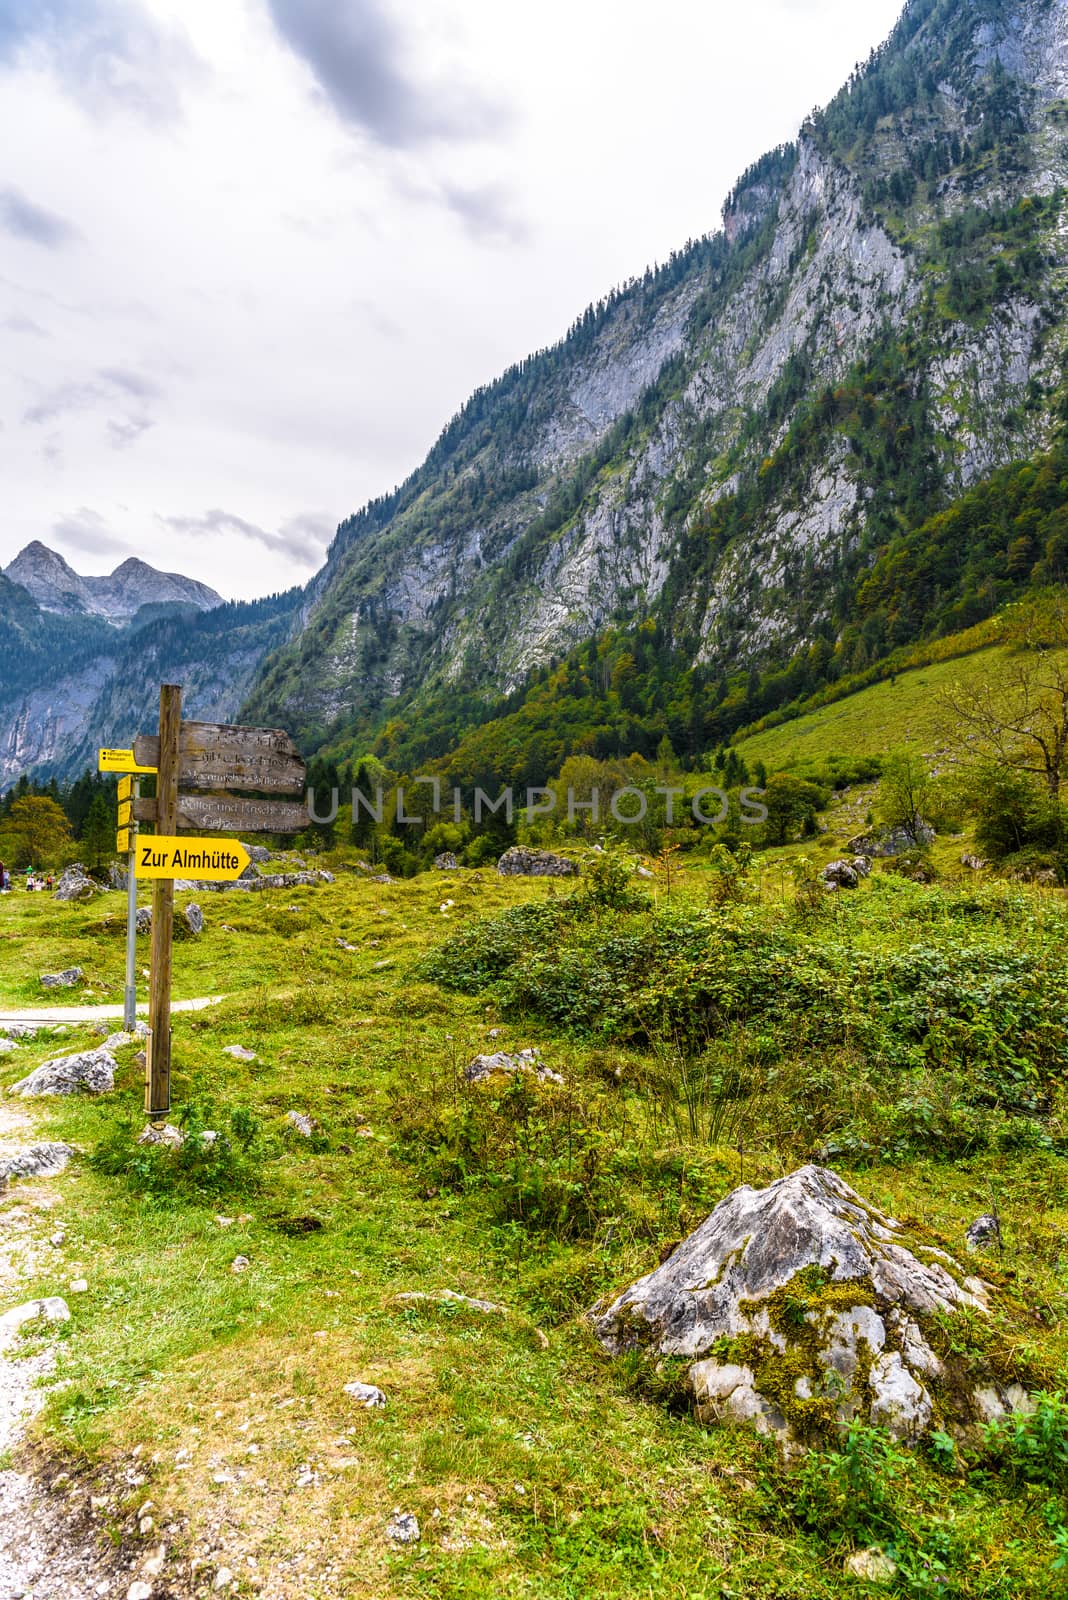 Signpost pointer in mountains Koenigssee, Konigsee, Berchtesgaden National Park, Bavaria, Germany. by Eagle2308